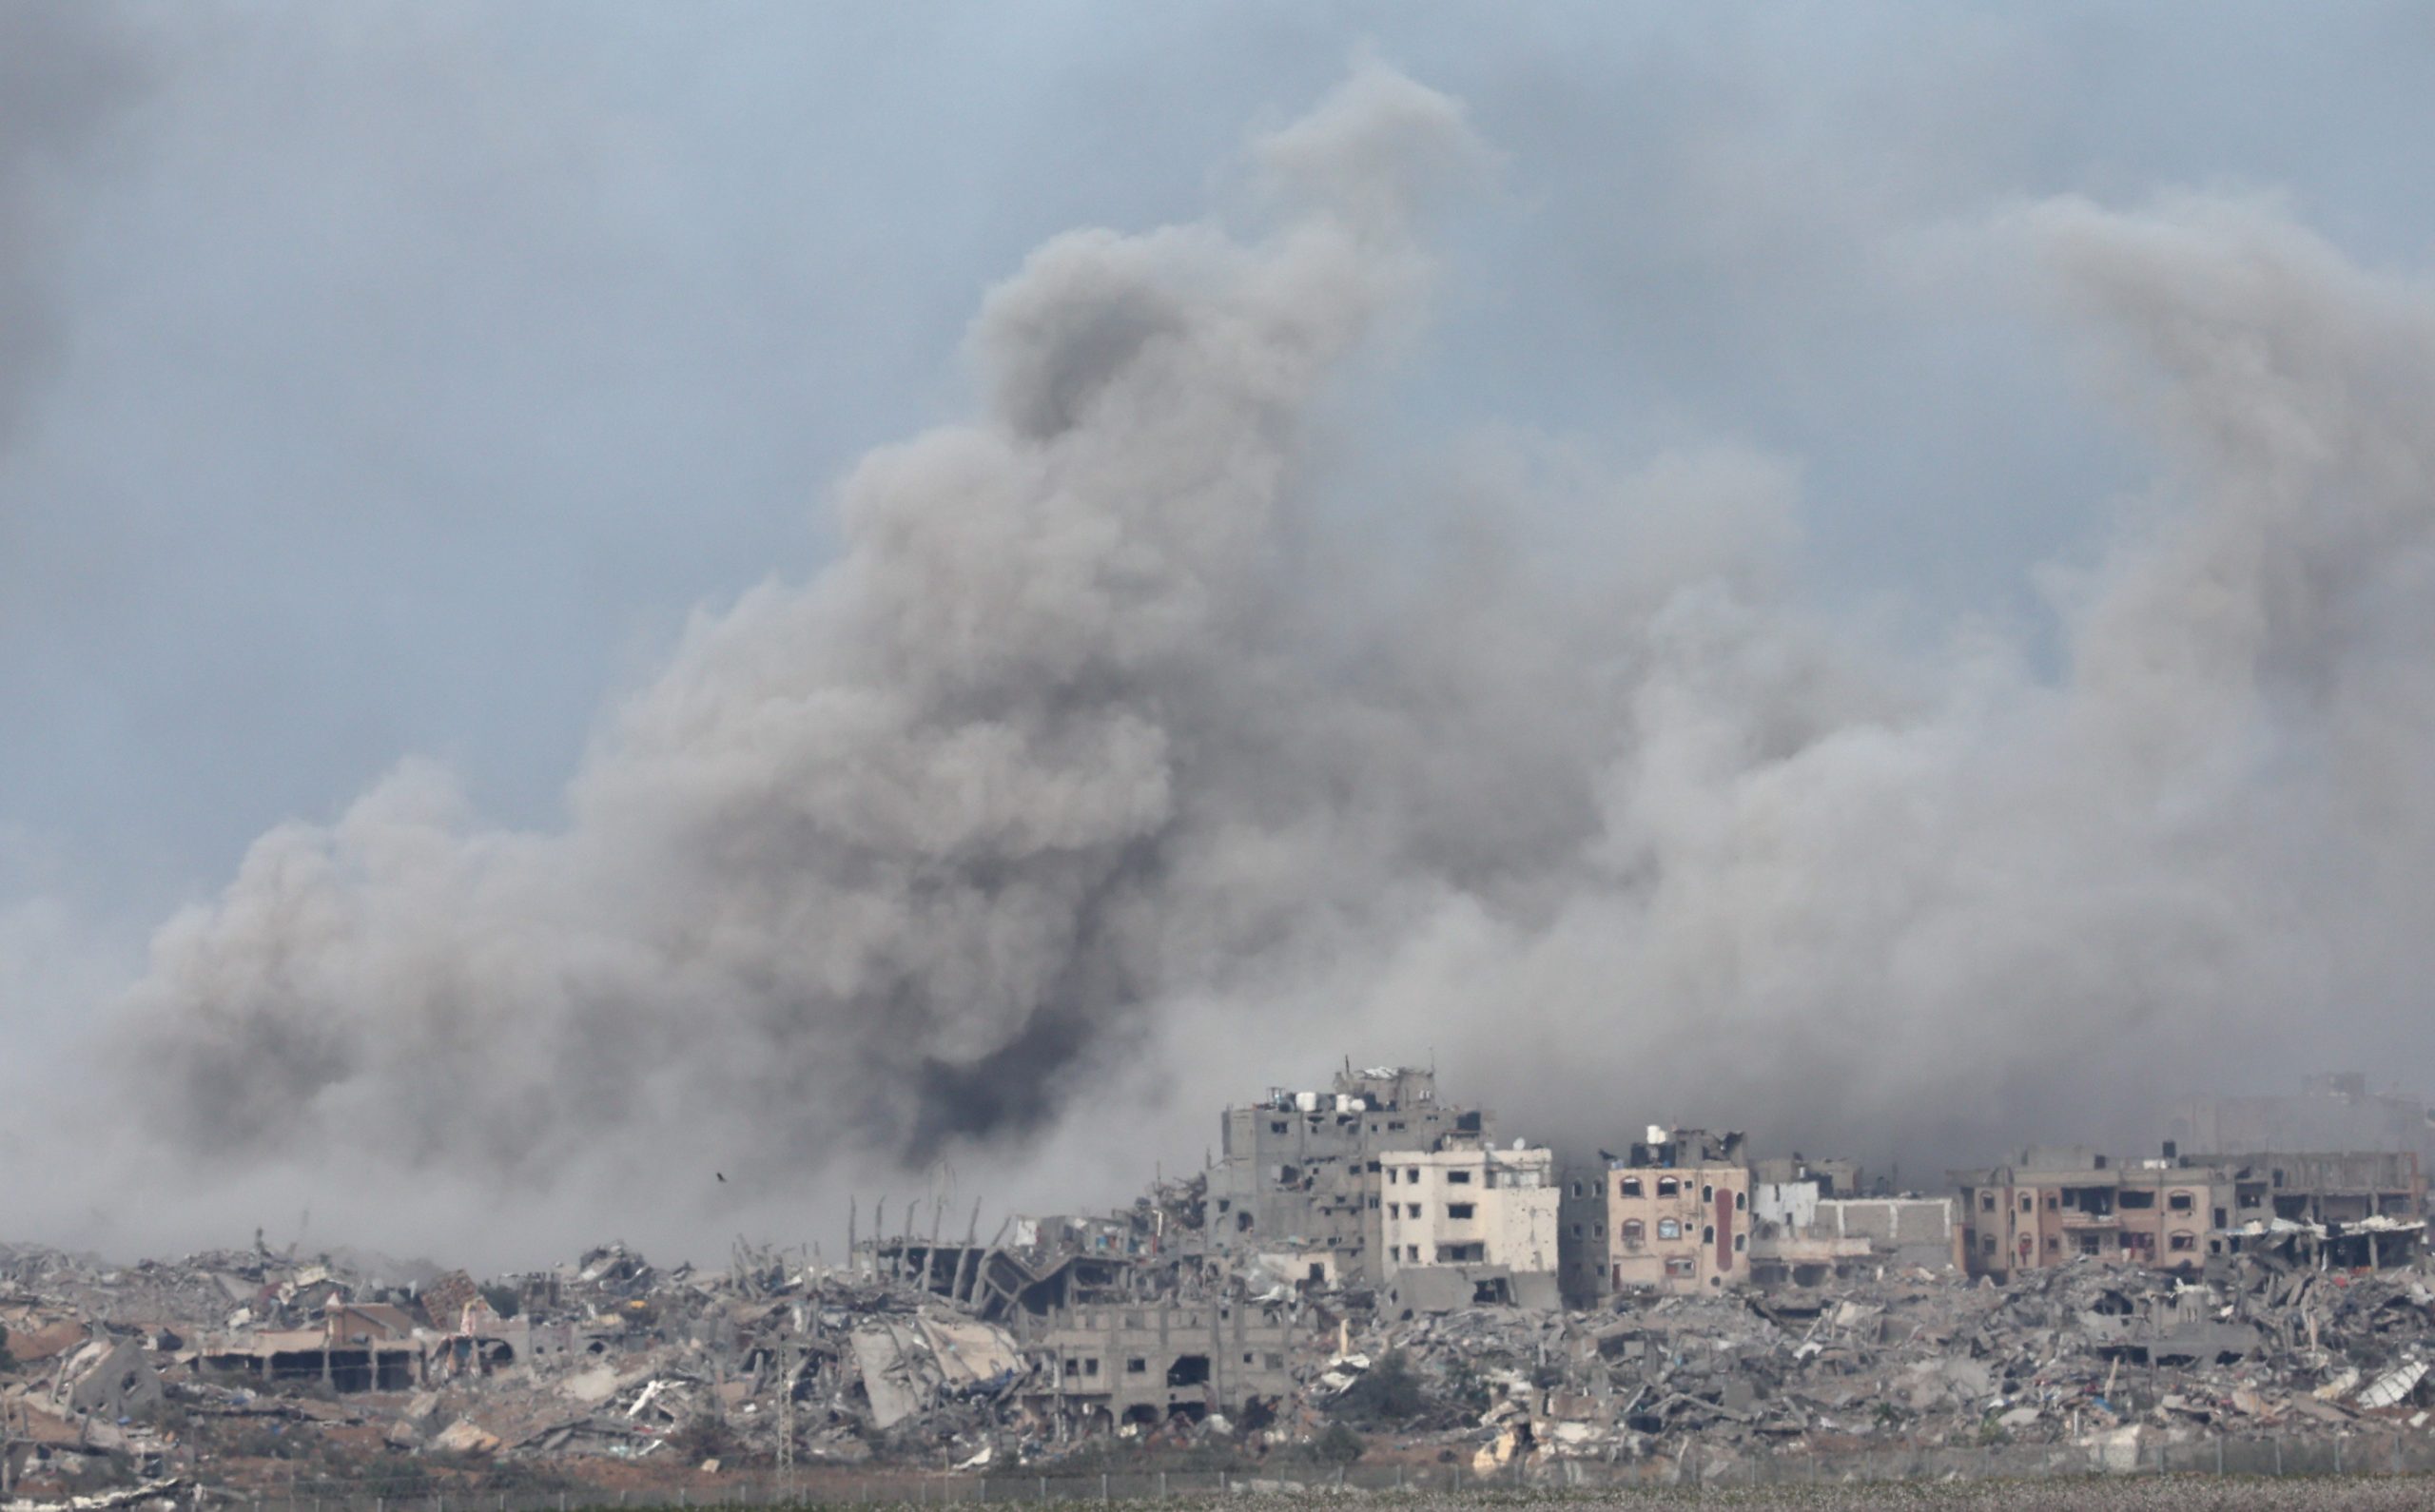 epa11018598 Smoke rises following an Isareli airstrike om Gaza's al-Shuja'ia district as seen from Nahal Oz, Israel, 09 December 2023. Israeli forces resumed military strikes on Gaza after a week-long truce expired on 01 December. More than 16,200 Palestinians and at least 1,200 Israelis have been killed, according to the Palestinian Health Ministry and the Israel Defense Forces (IDF), since Hamas militants launched an attack against Israel from the Gaza Strip on 07 October, and the Israeli operations in Gaza and the West Bank which followed it.  EPA/ATEF SAFADI